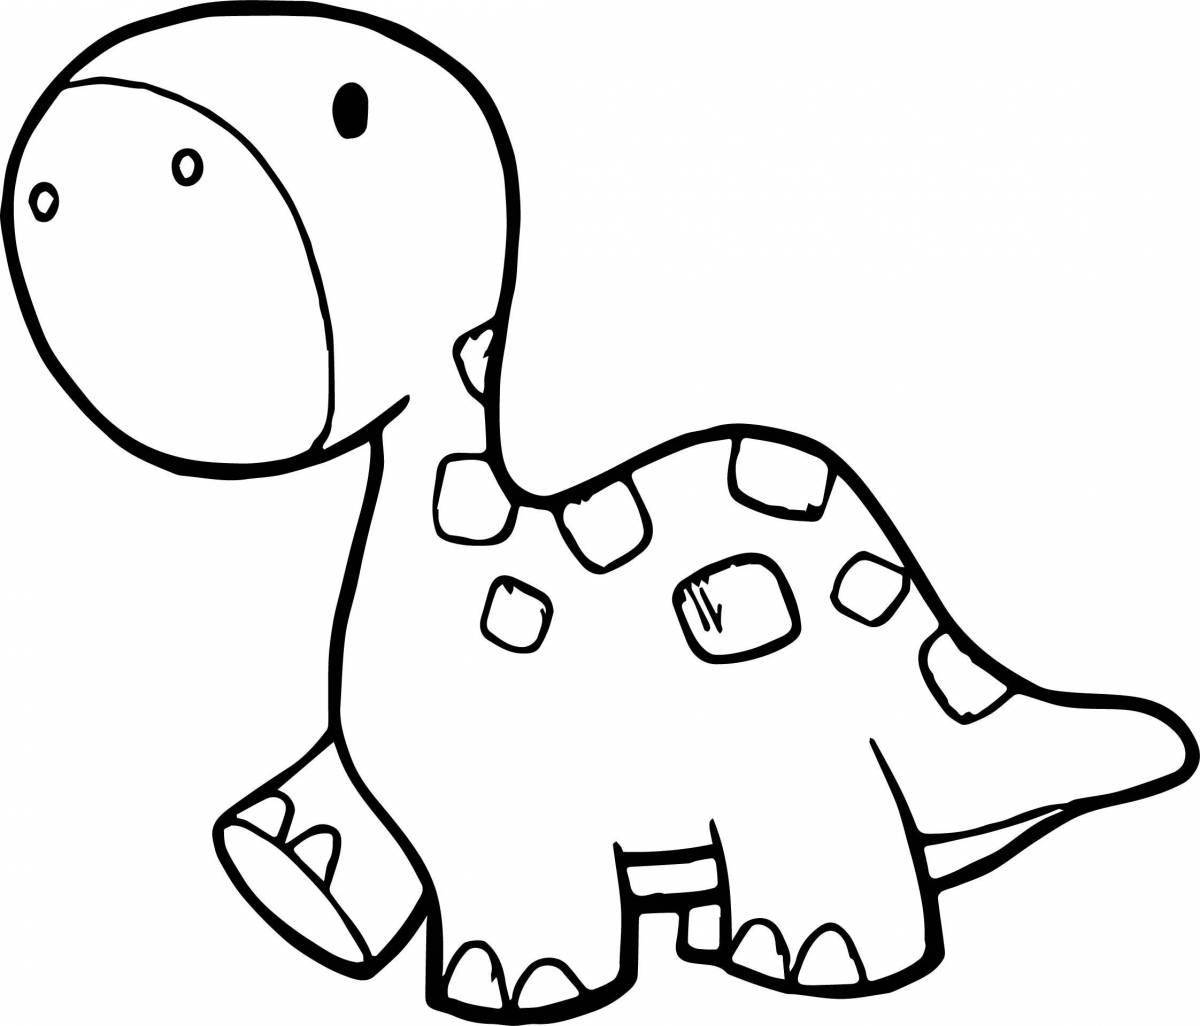 Cute and cuddly dinosaur coloring book